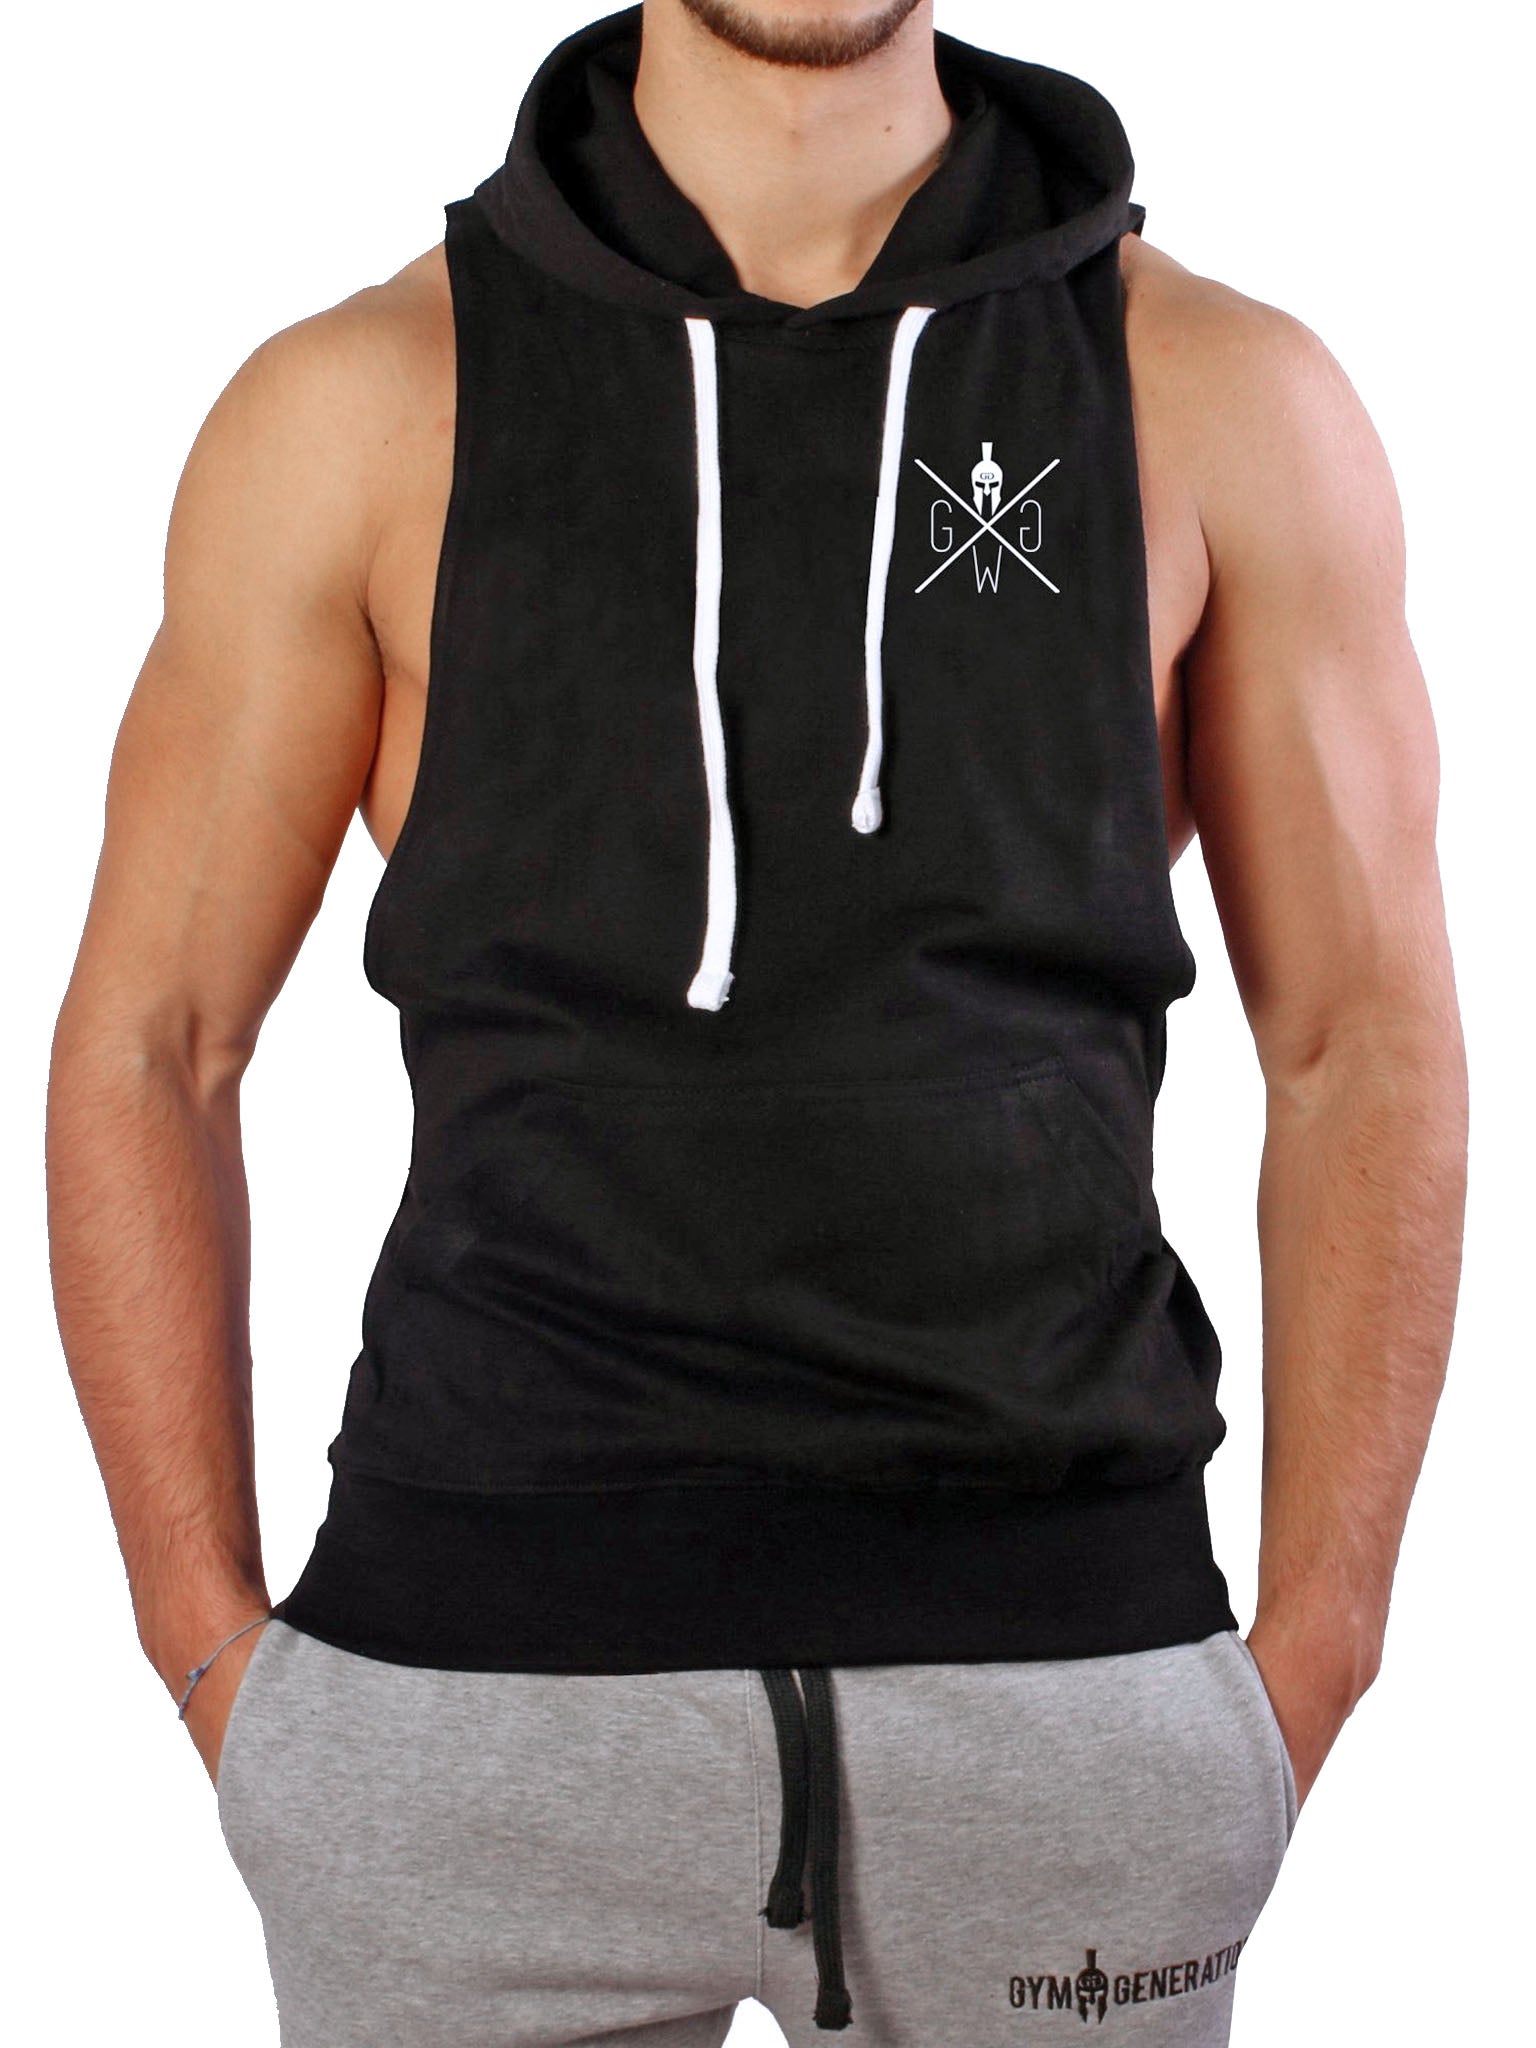 Men's fitness tank top with hood of 100% cotton – Gym Generation®